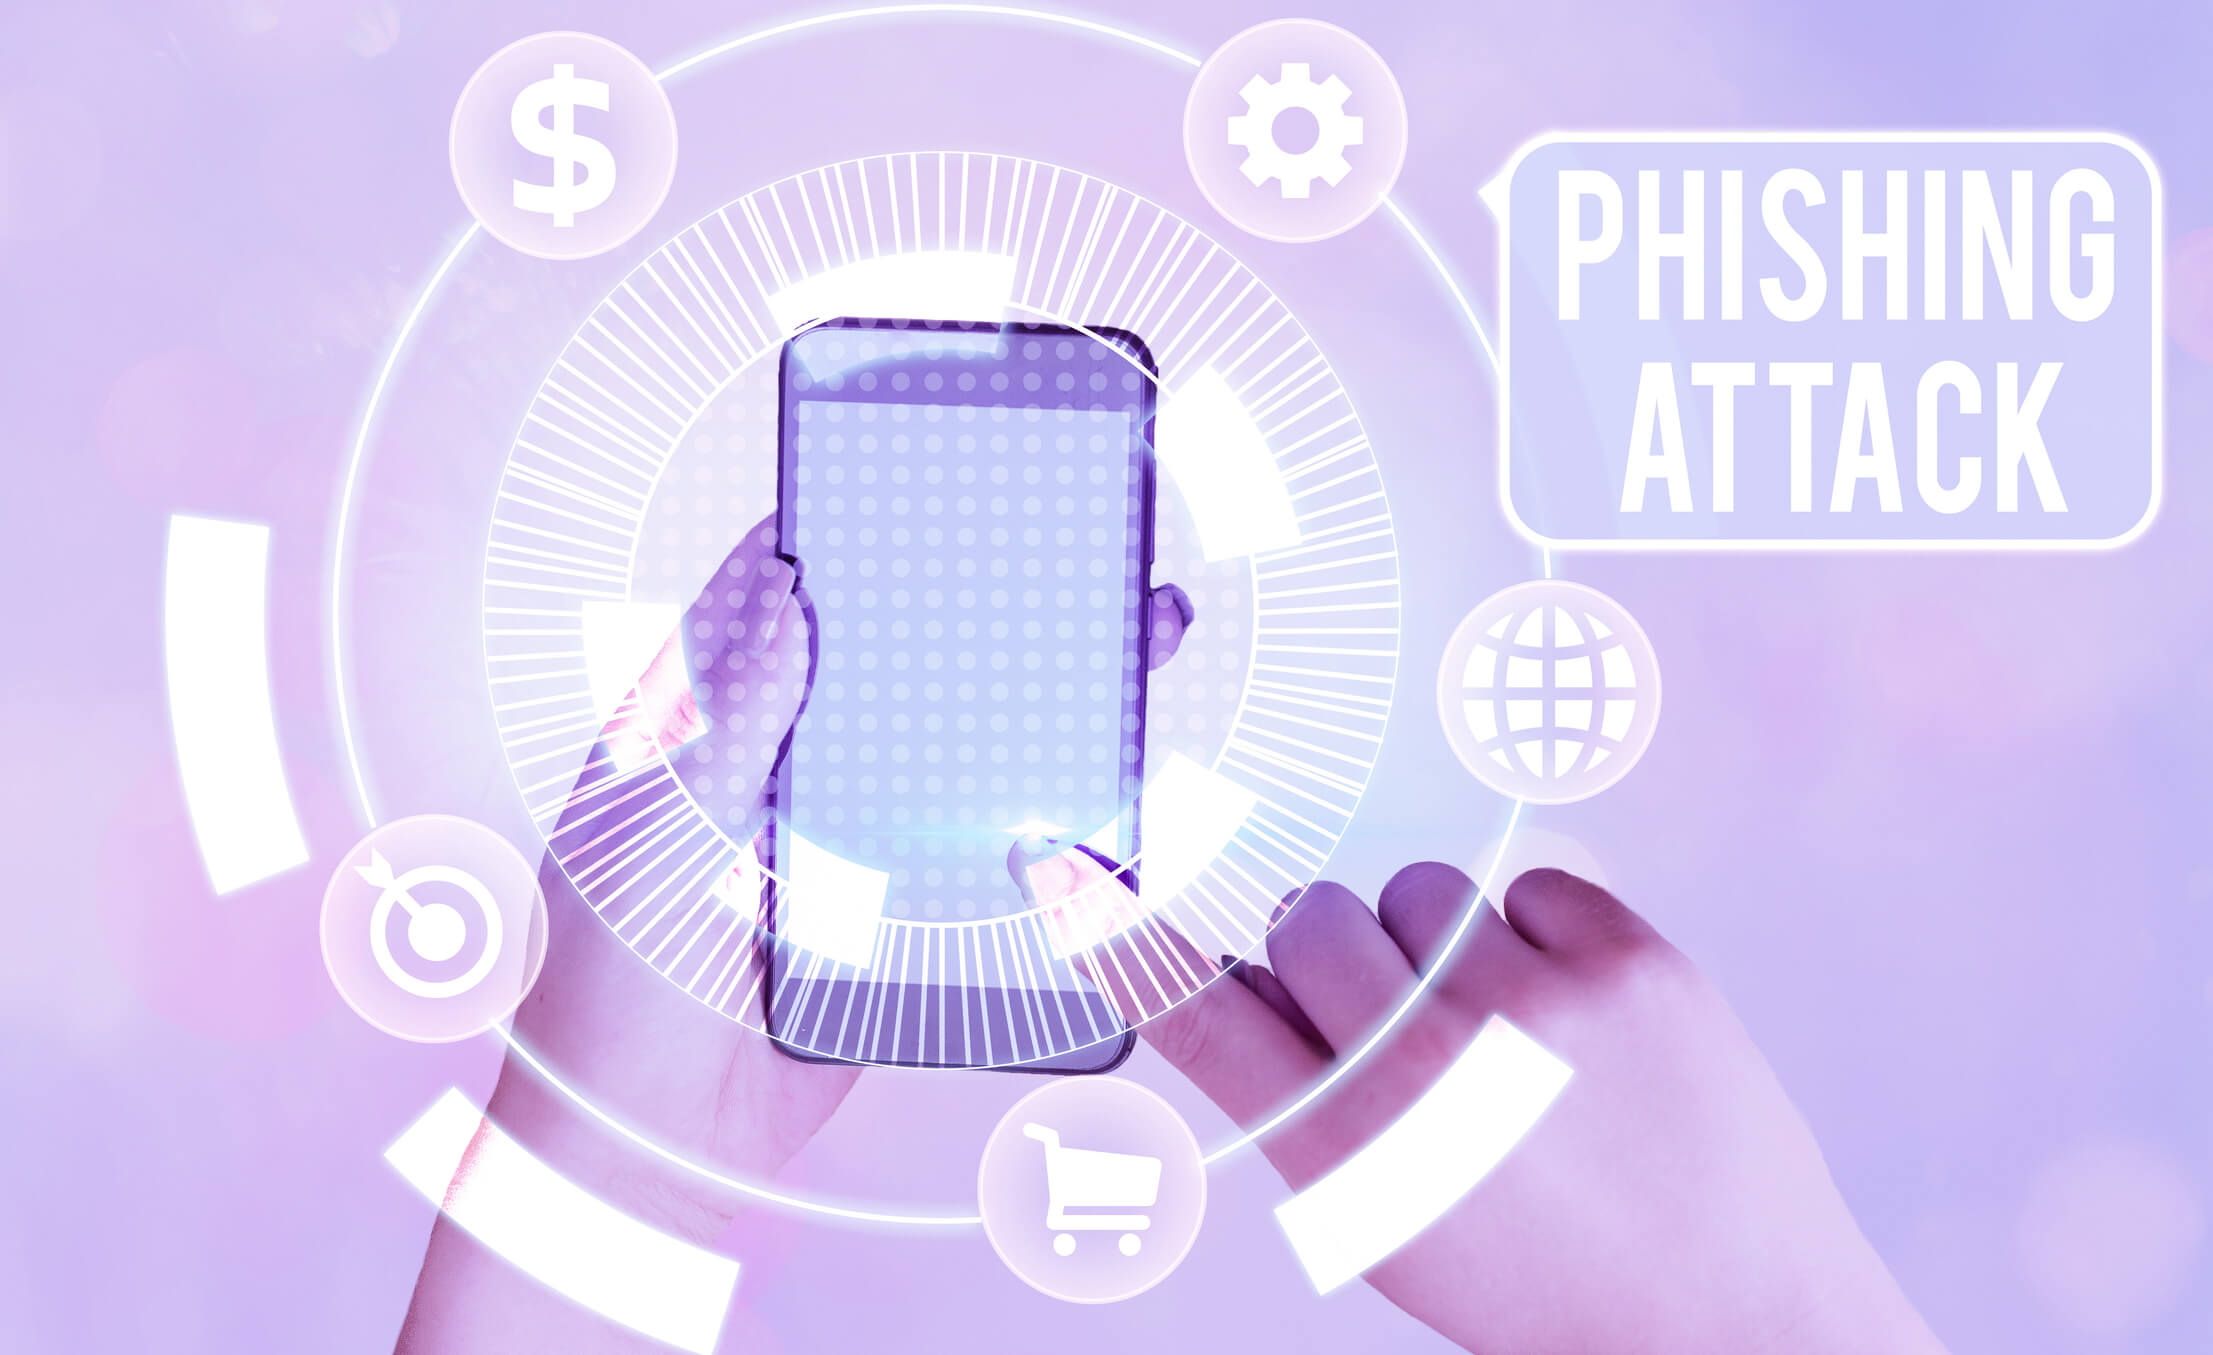 A cell phone is compromised in a phishing attach